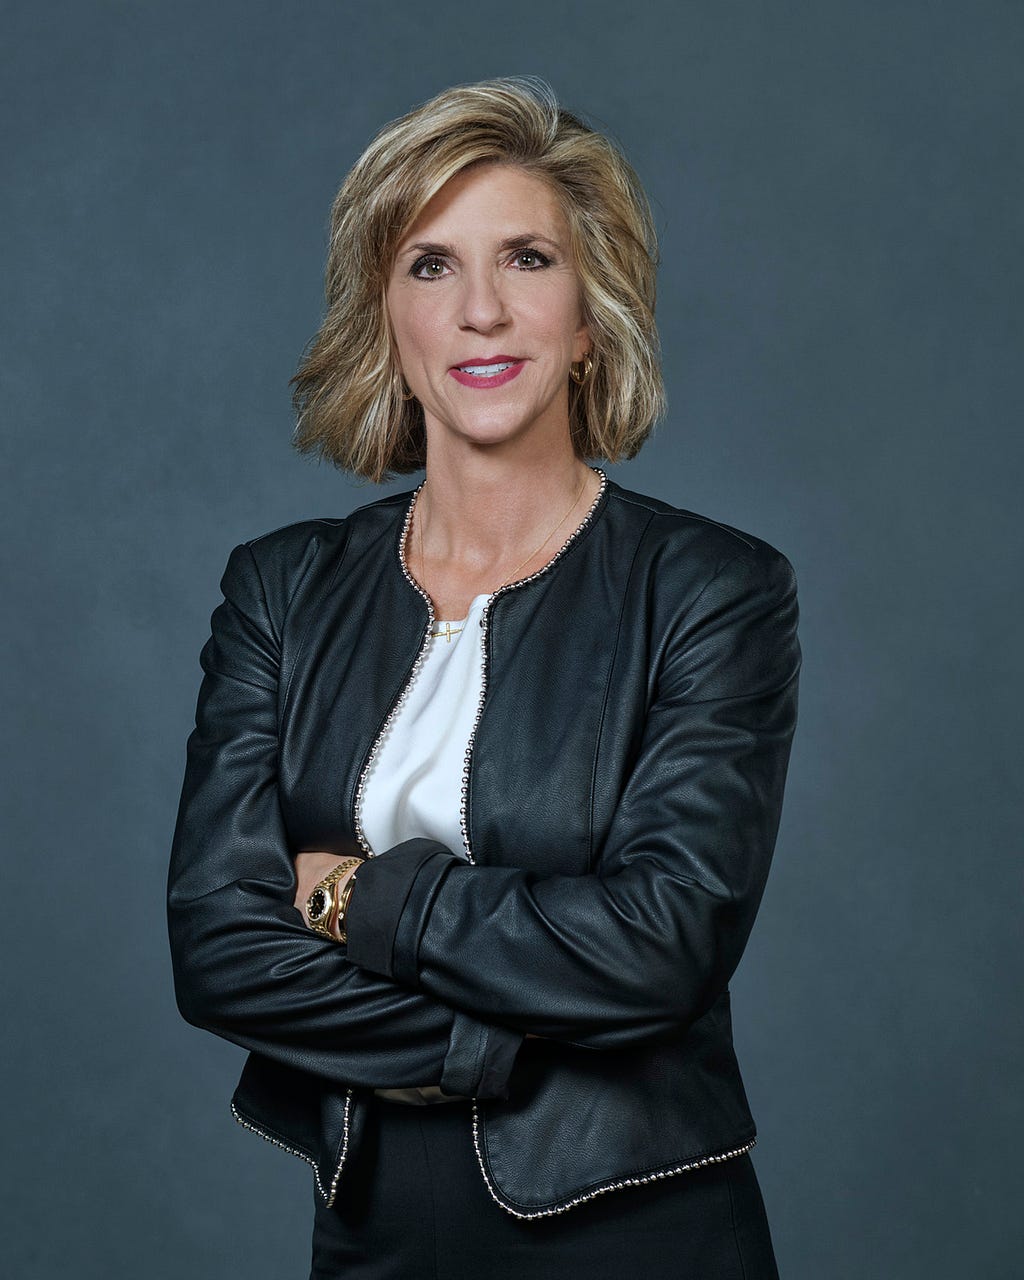 Prosecutor Kelly Siegler in a black jacket in Cold Justice promotional photo